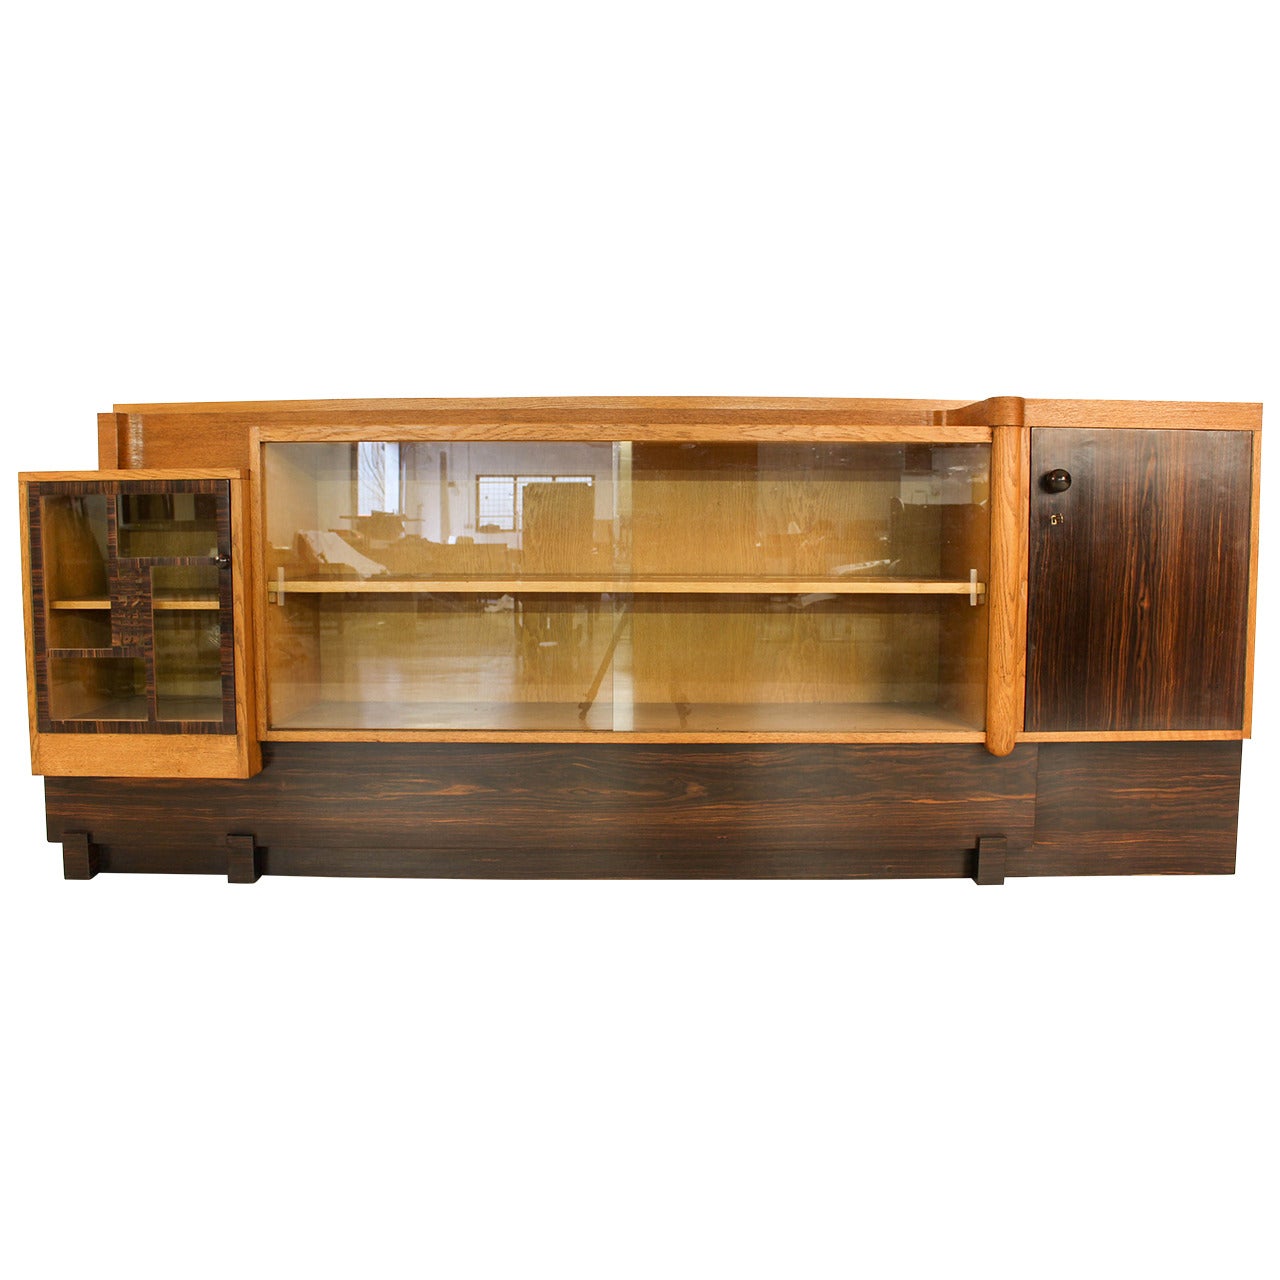 Rare Art Deco Haagse School Sideboard by 't Woonhuys Amsterdam